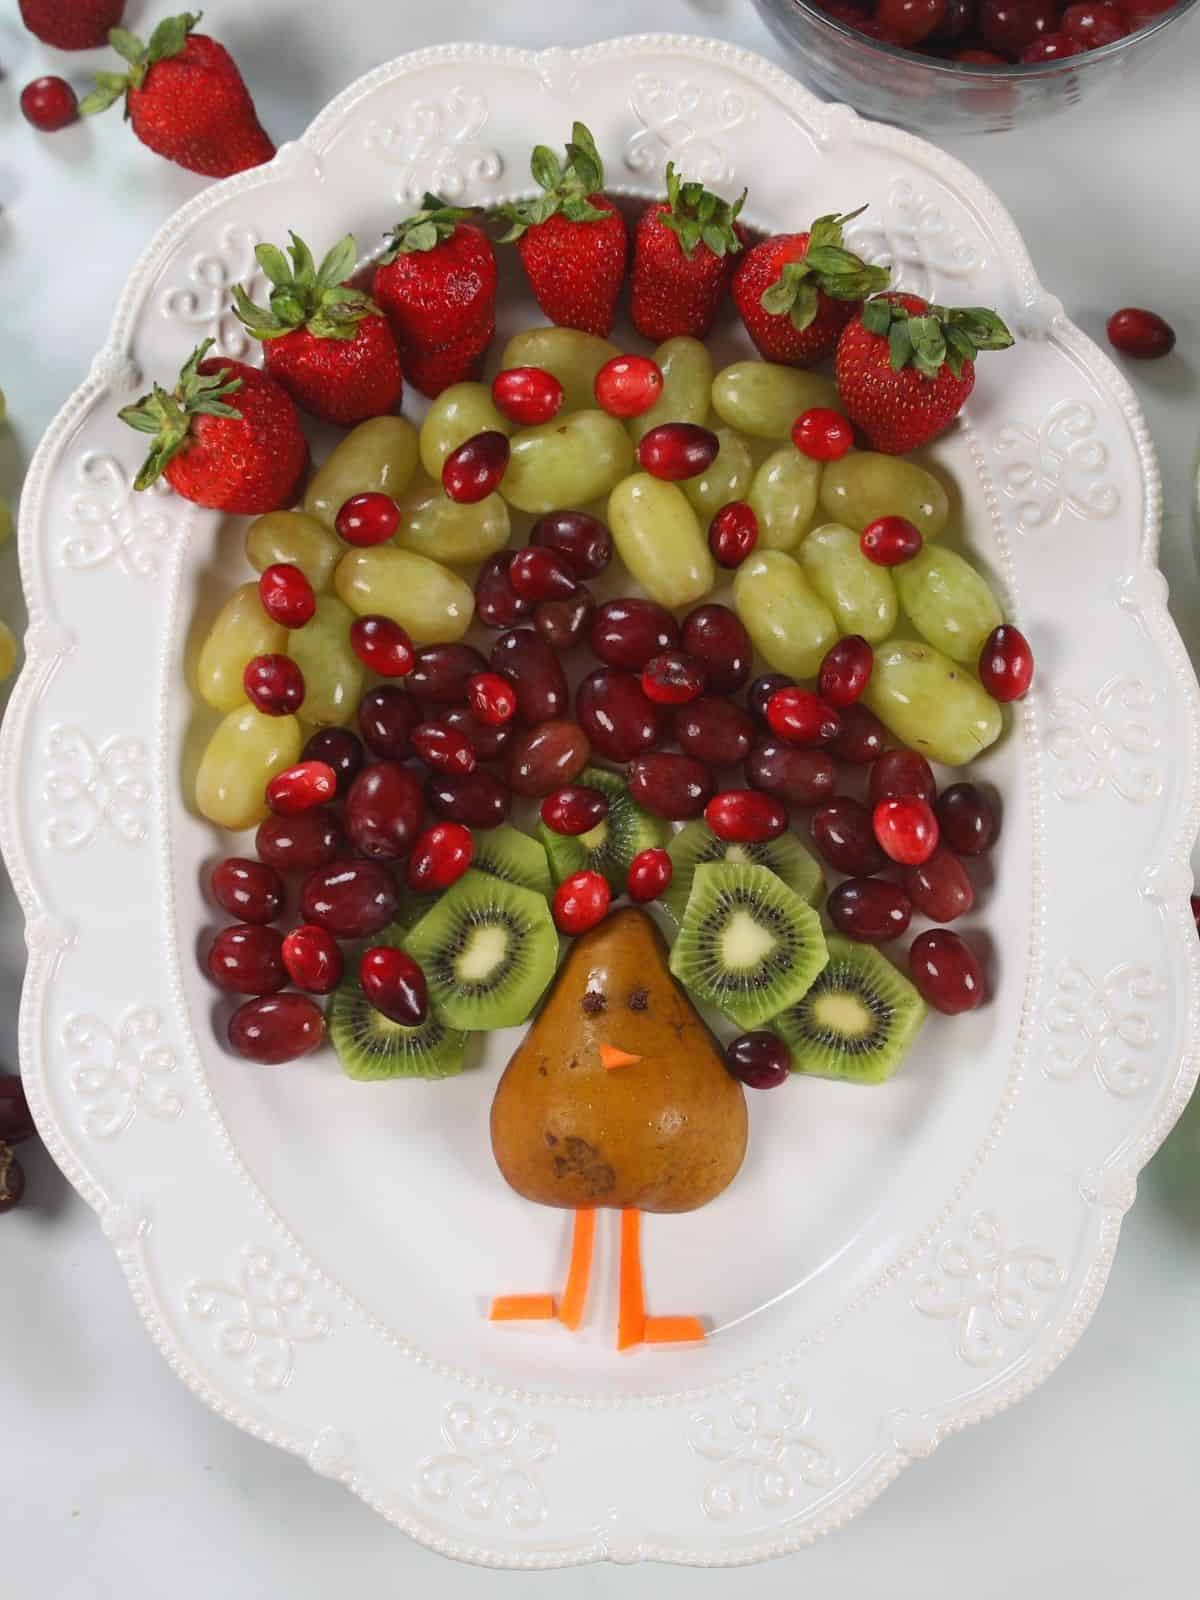 Fruit arranged to look like the feathers of a turkey coming out of pear.